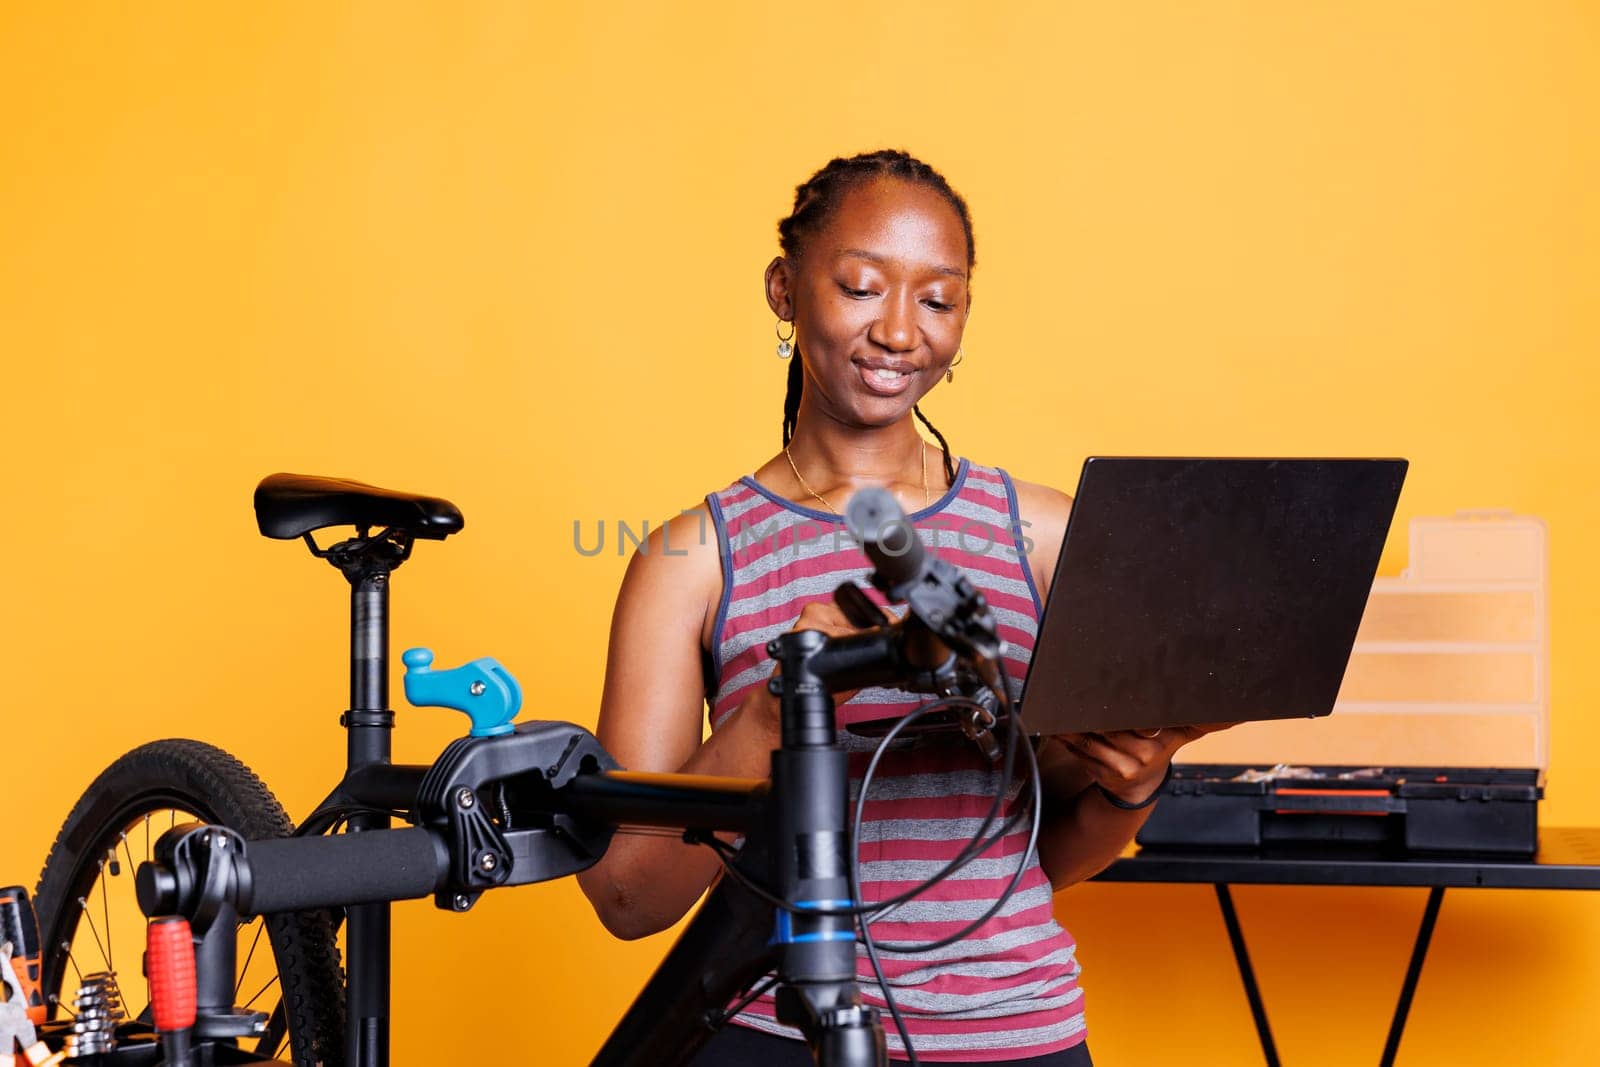 Sporty african american lady repairing broken bicycle with assistance from internet on digital laptop. Youthful black woman examining and fixing damaged components with toolkit and personal computer.